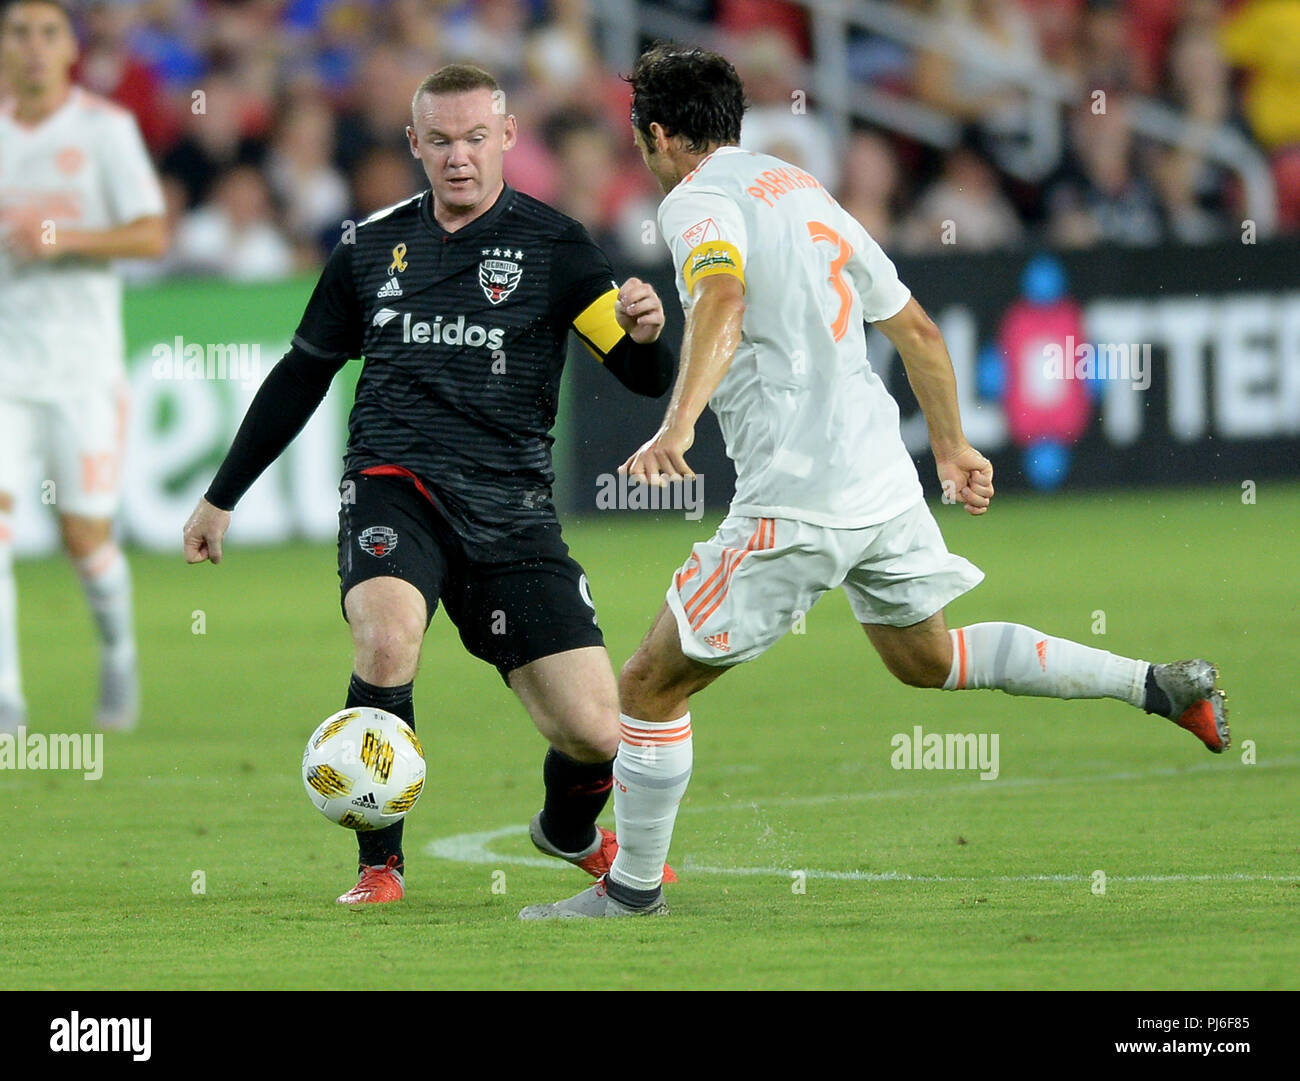 September 2, 2018 - Washington, DC, USA - 20180902 - D.C. United forward WAYNE ROONEY (9) launches a pass against Atlanta United FC defender MICHAEL PARKHURST (3) in the first half at Audi Field in Washington. (Credit Image: © Chuck Myers/ZUMA Wire) Stock Photo